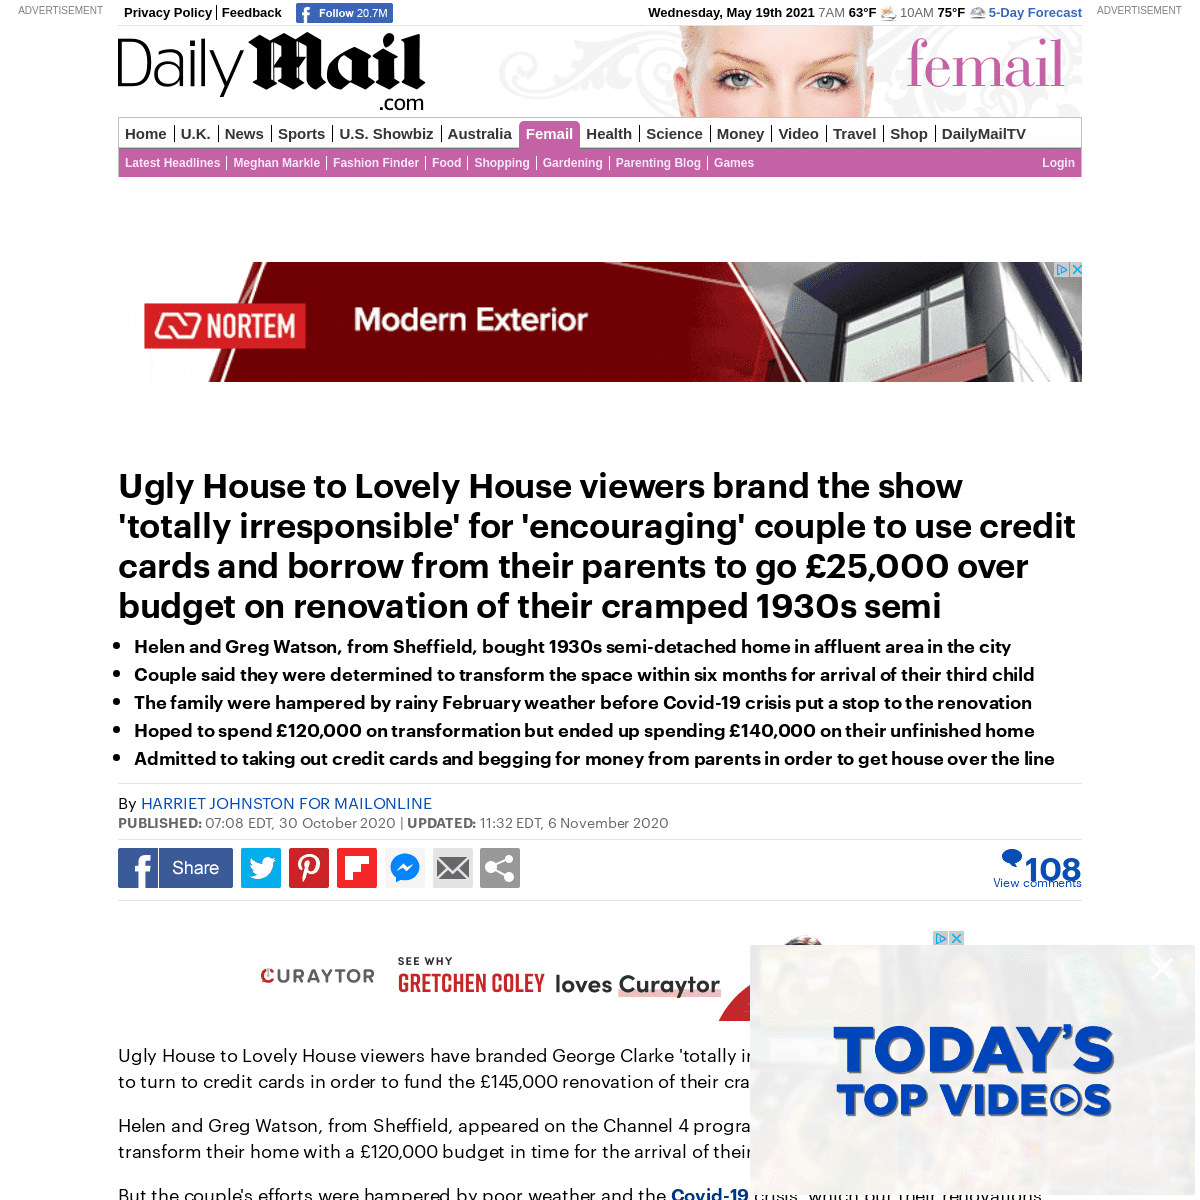 A complete backup of https://www.dailymail.co.uk/femail/article-8896449/Couple-spend-145-000-Sheffield-project-George-Clarkes-Ug